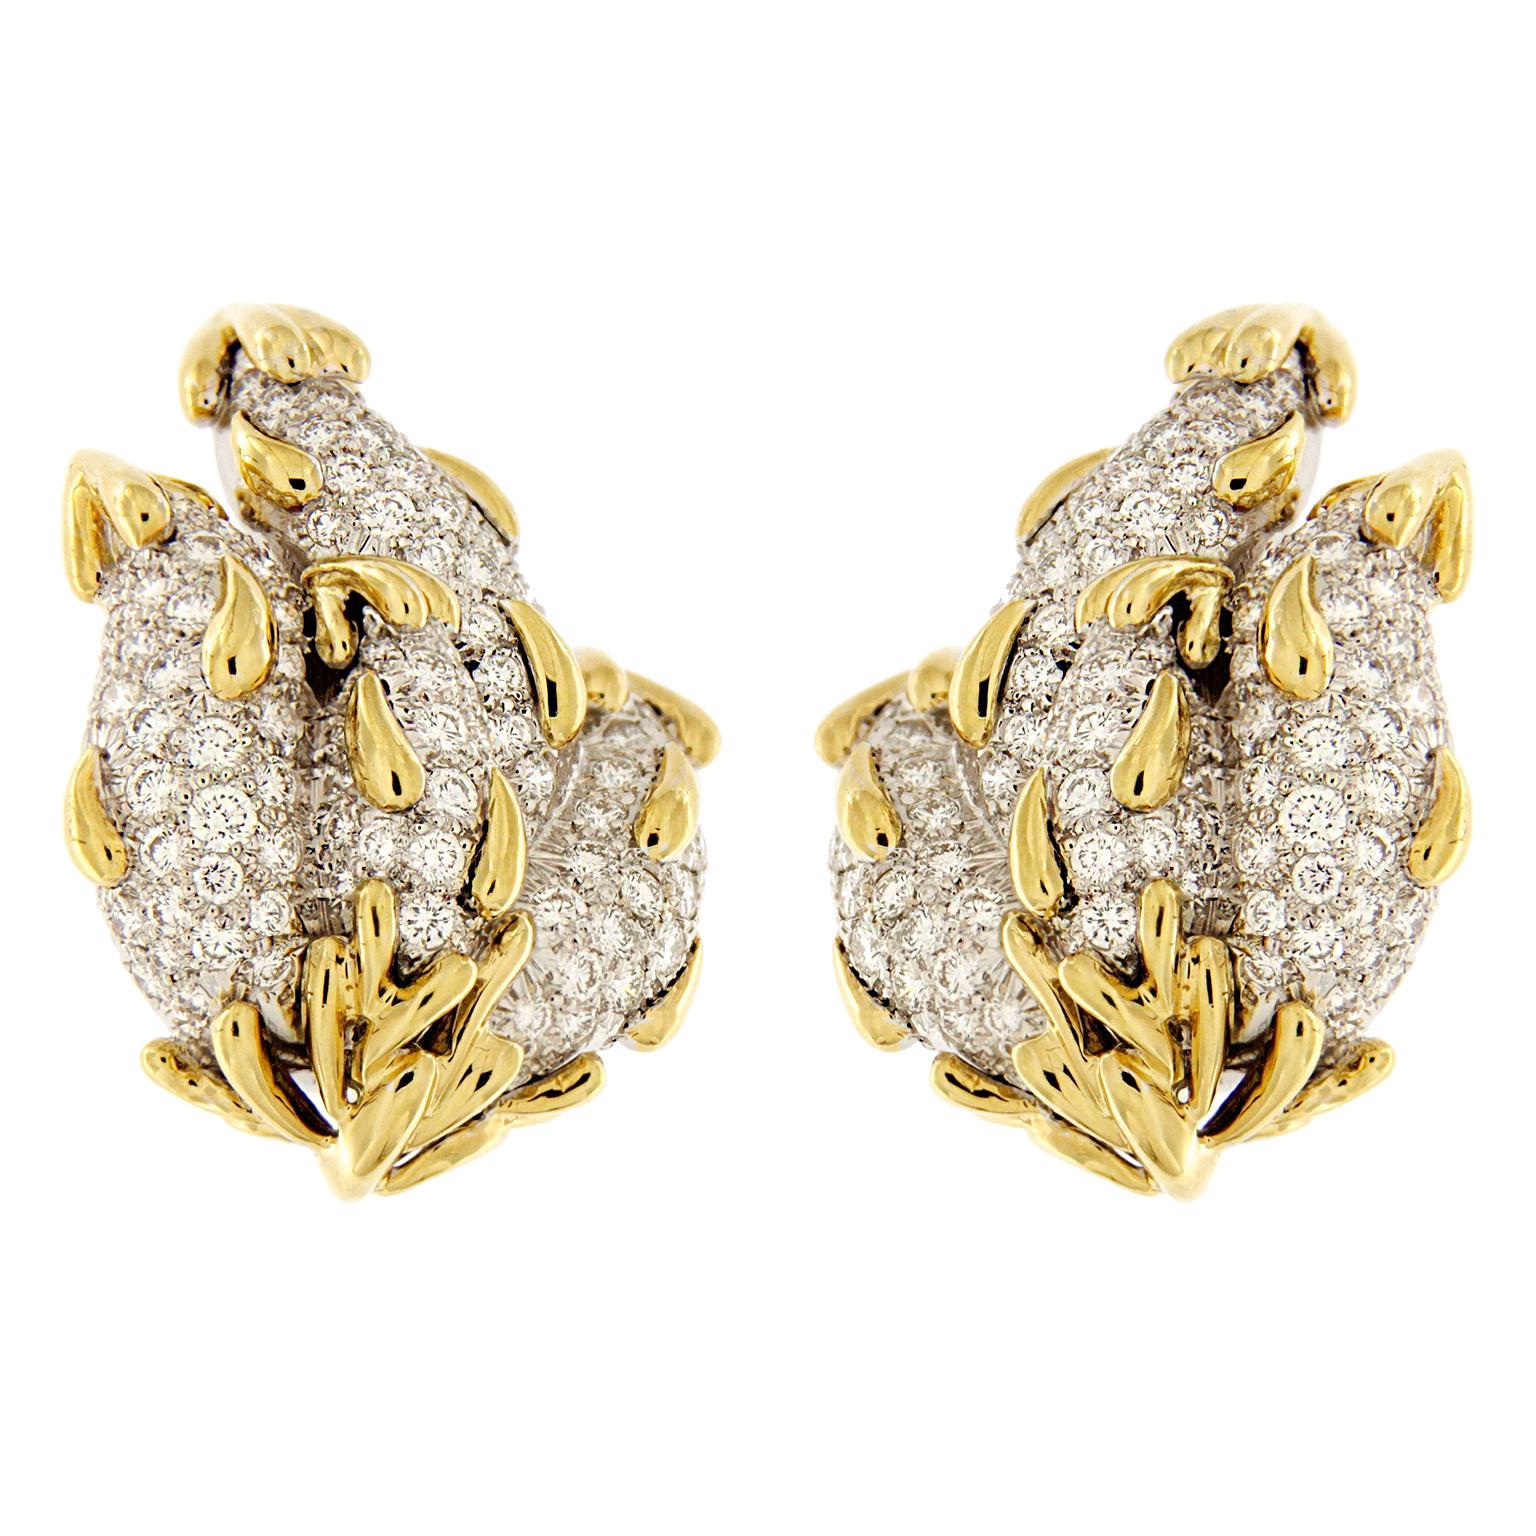 Valentin Magro Flame and Tear Drops Diamond Gold Platinum Earrings